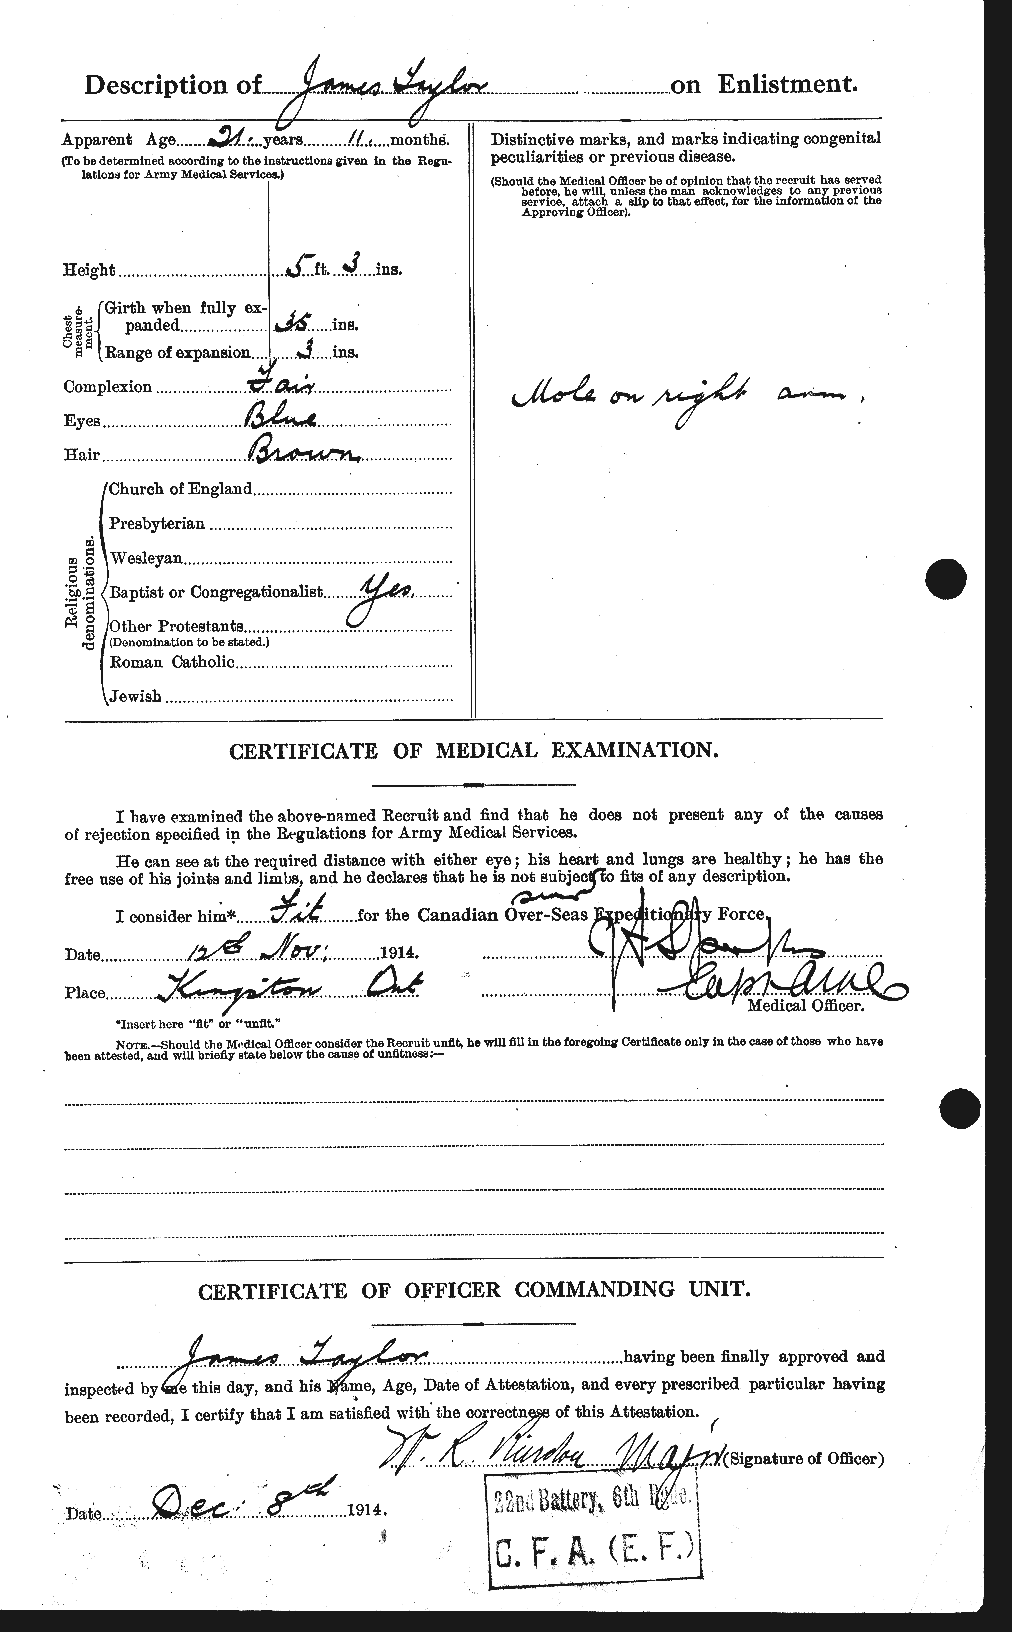 Personnel Records of the First World War - CEF 626891b